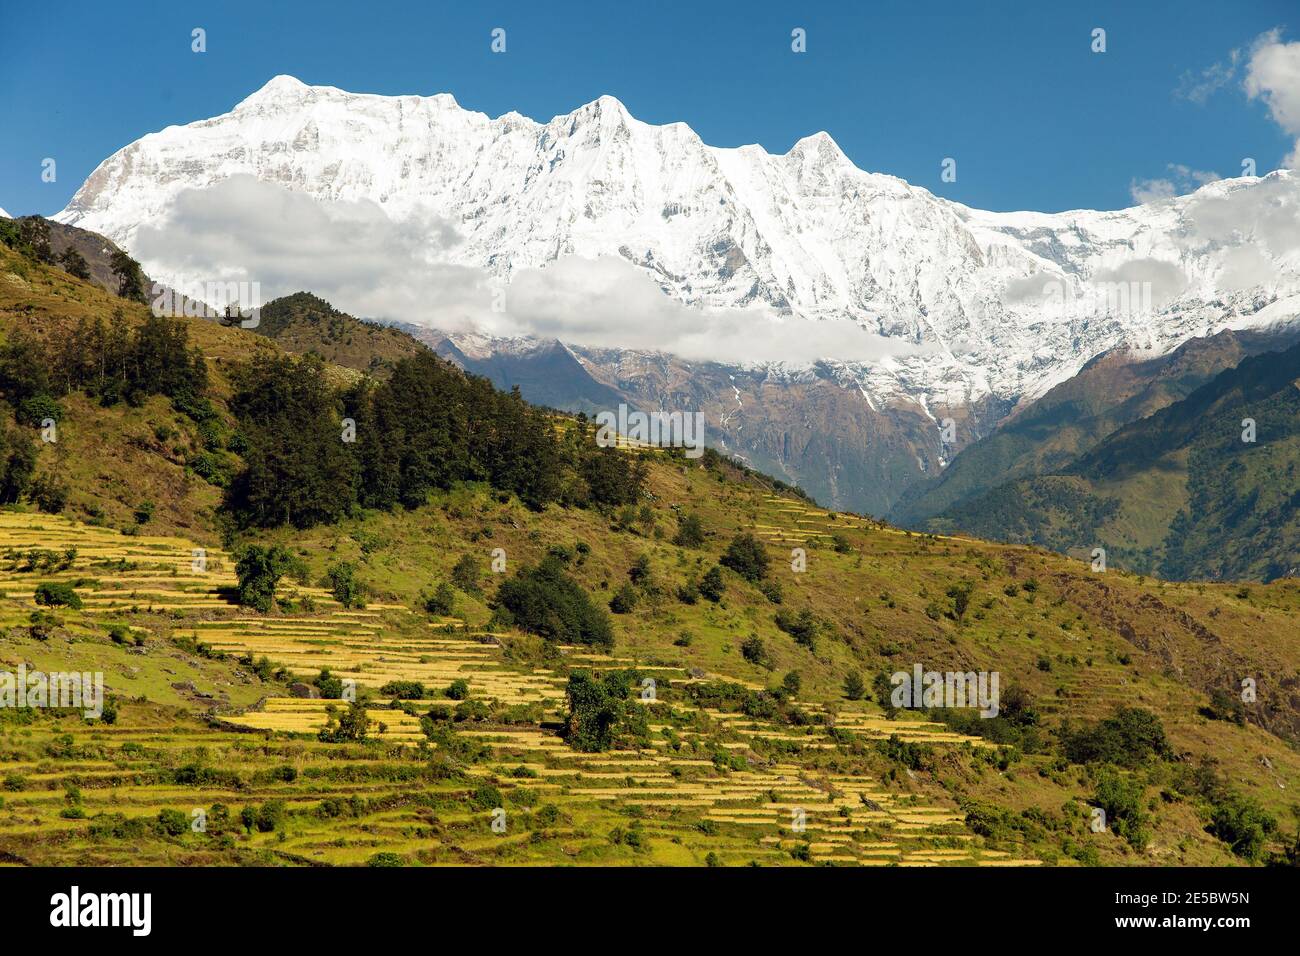 Rice field and snowy Himalayas mountain in Nepal Stock Photo